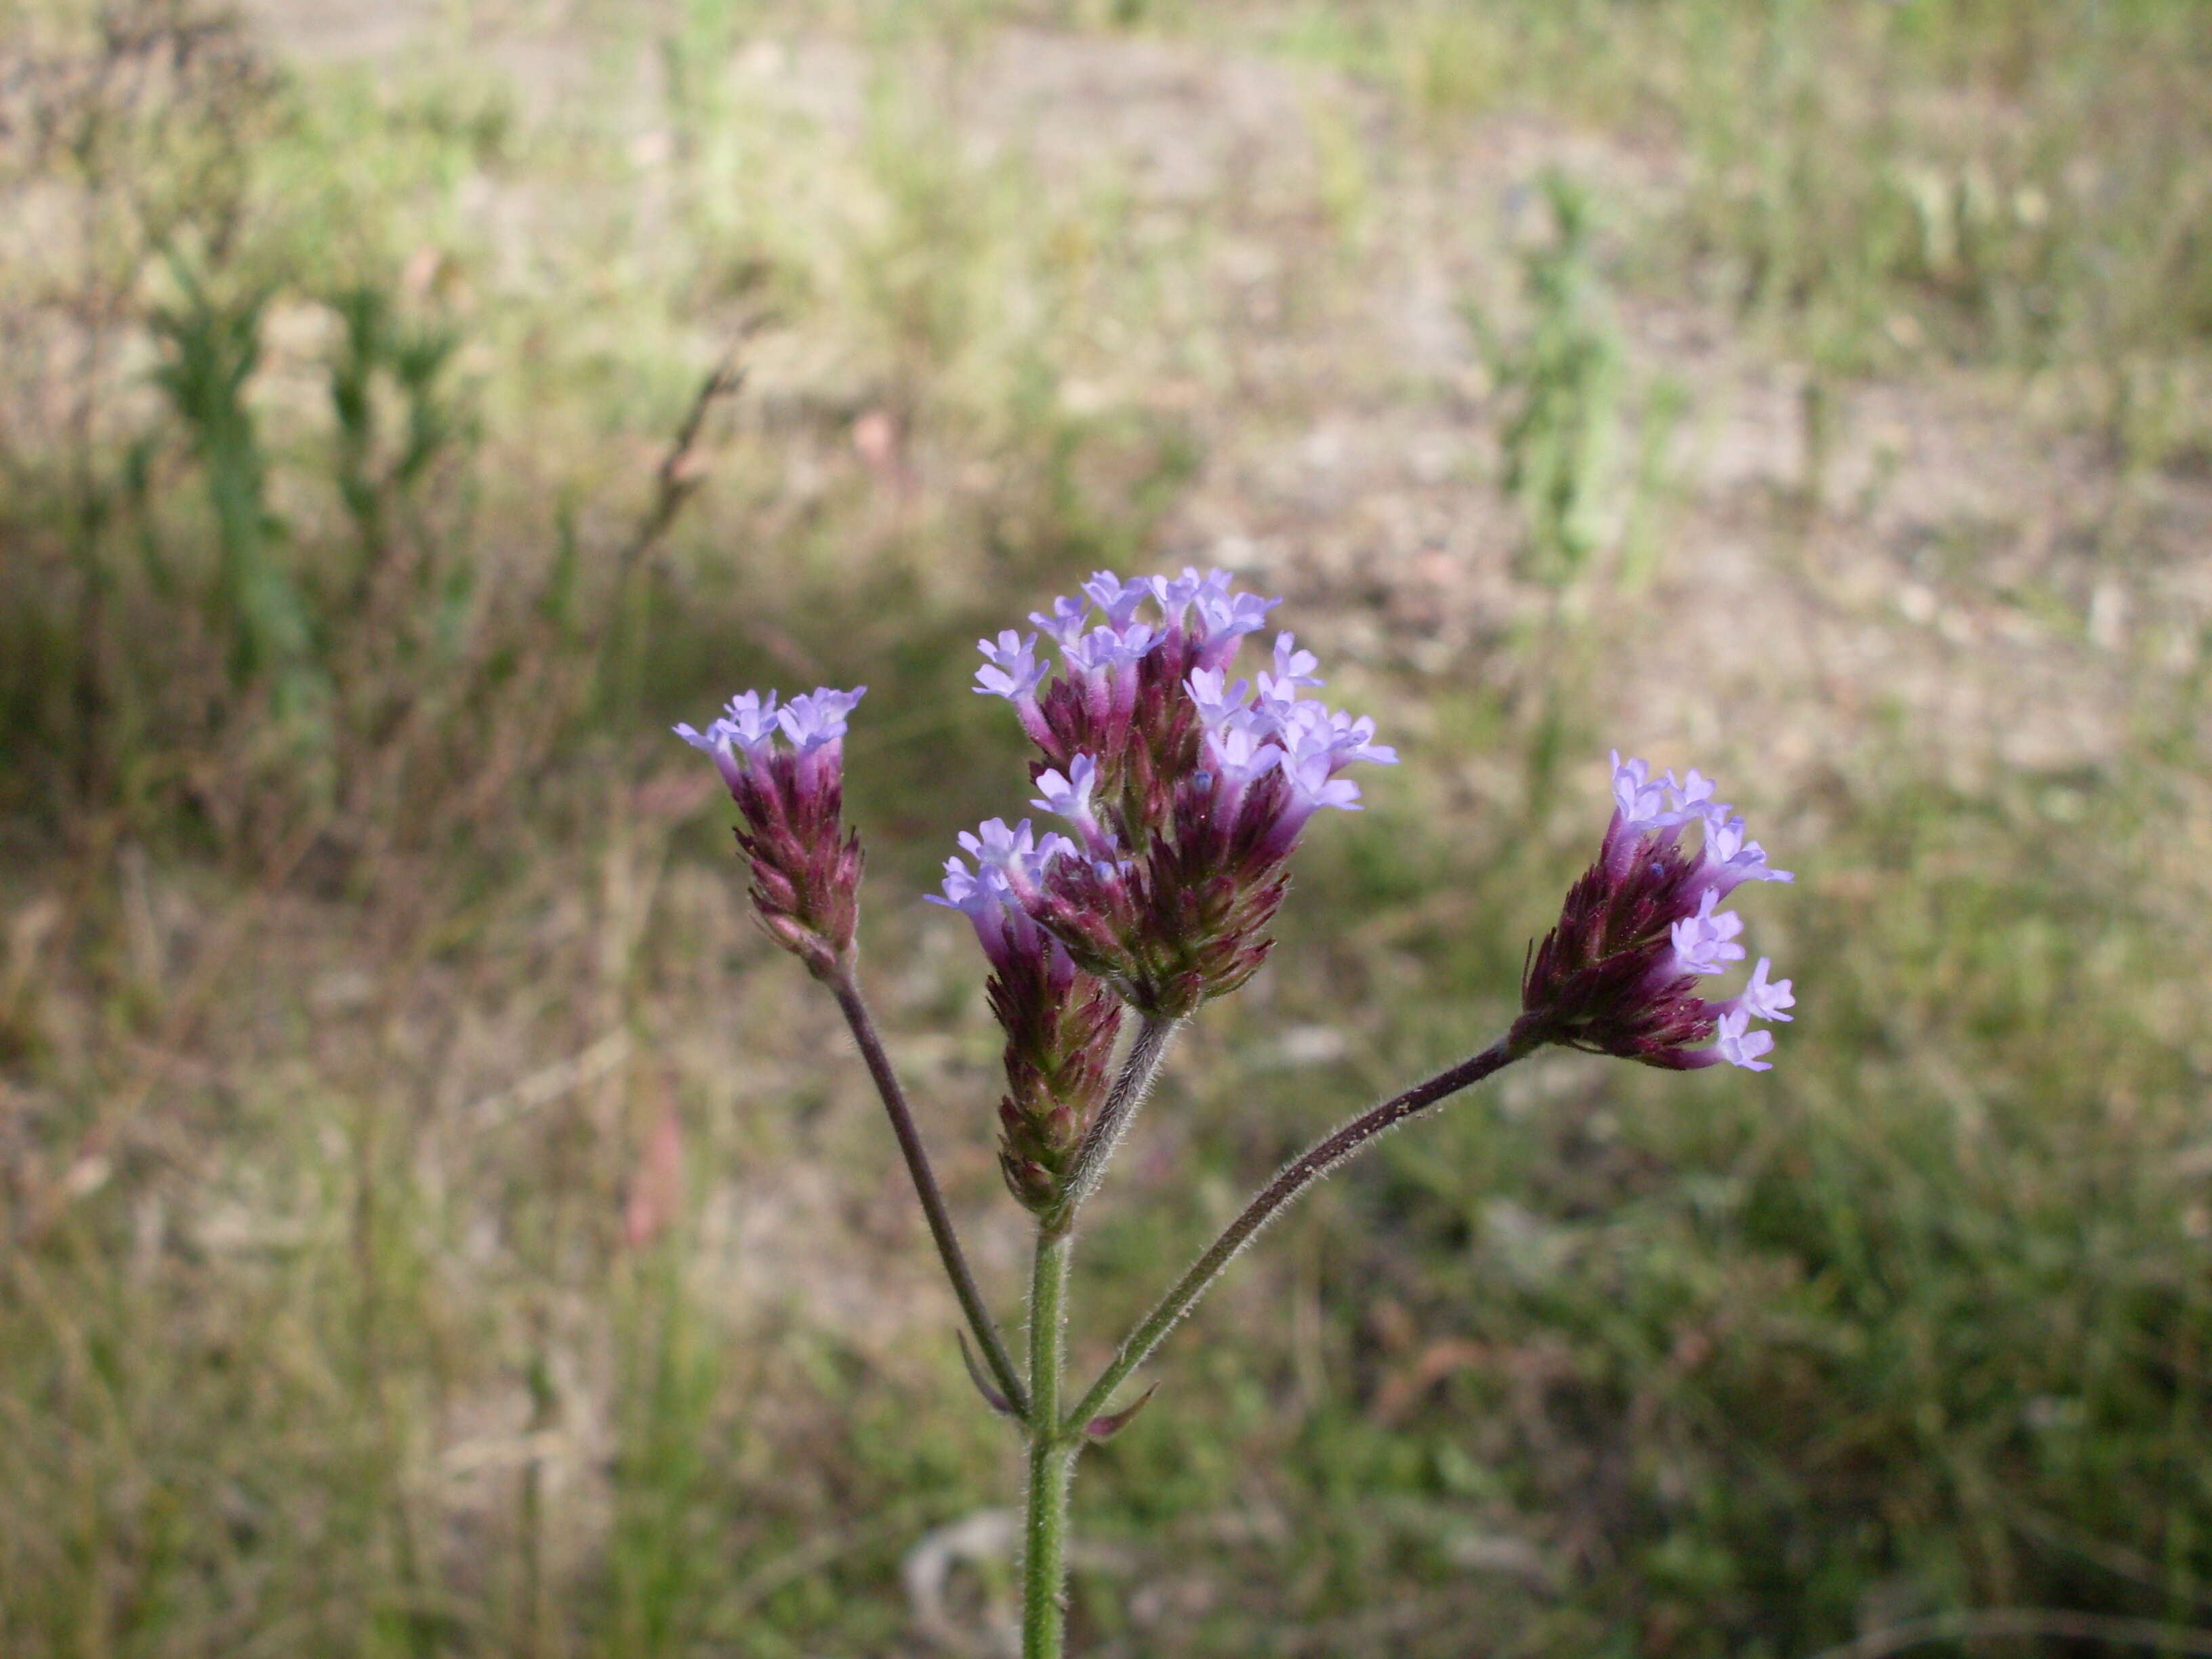 Image of vervain